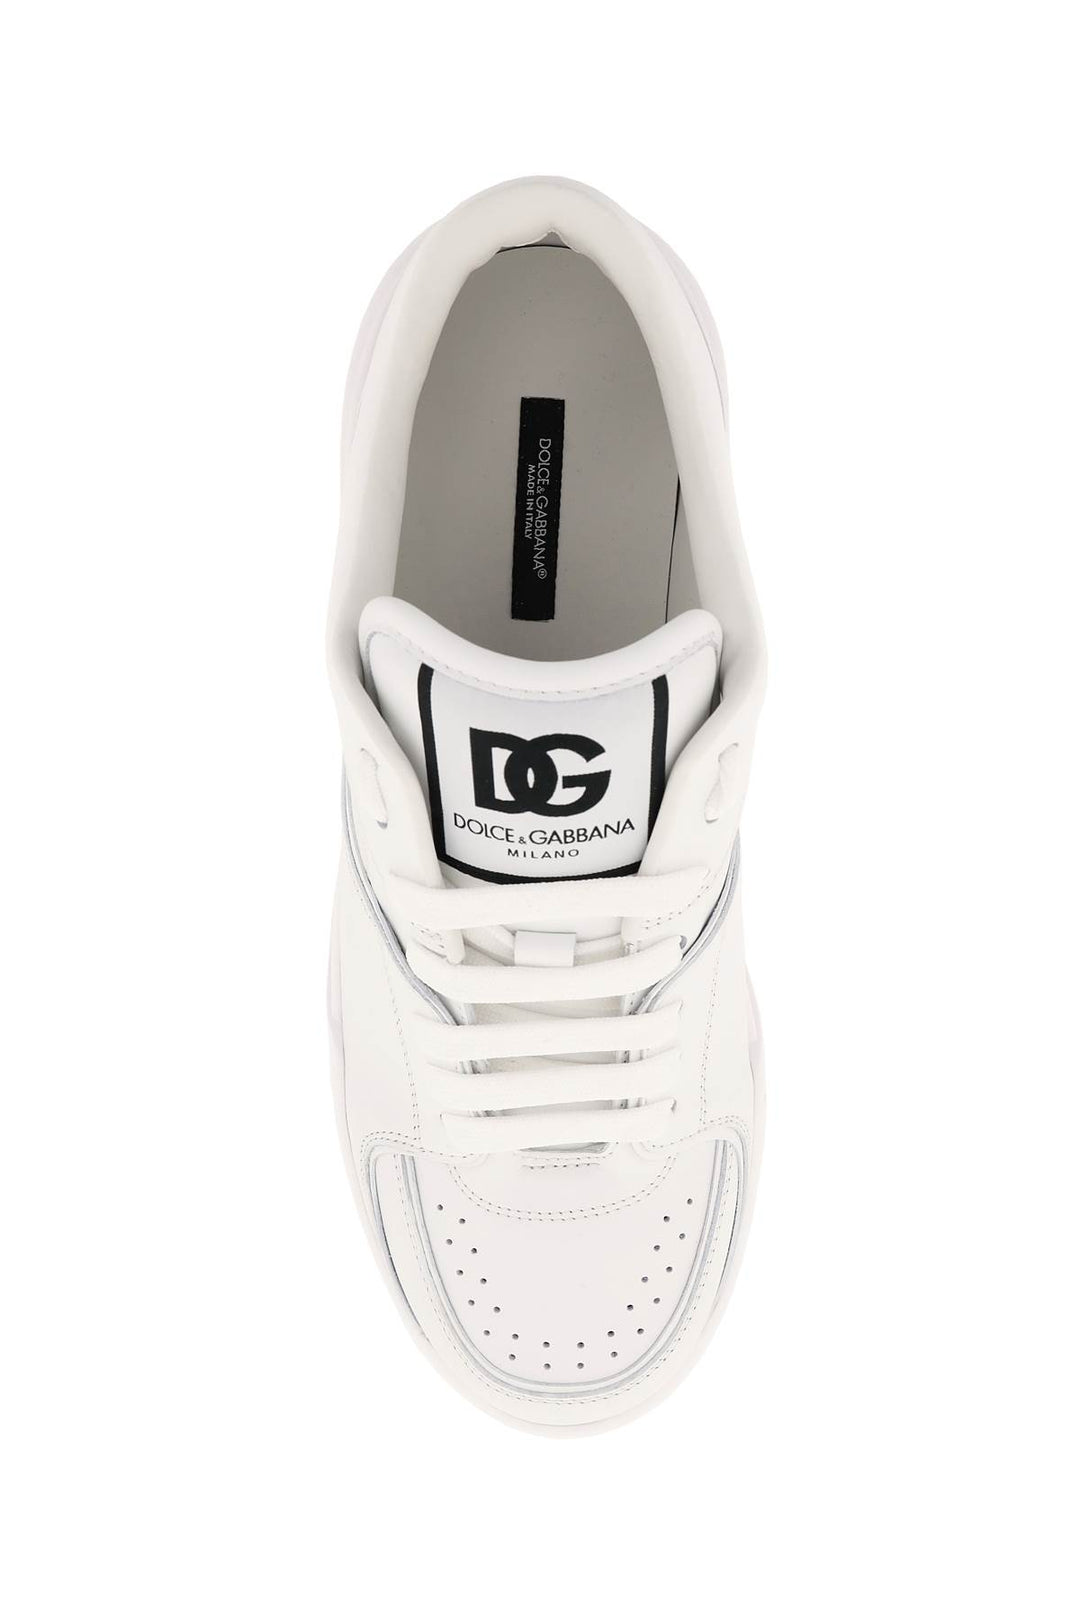 Dolce & Gabbana New Roma Leather Sneakers   White